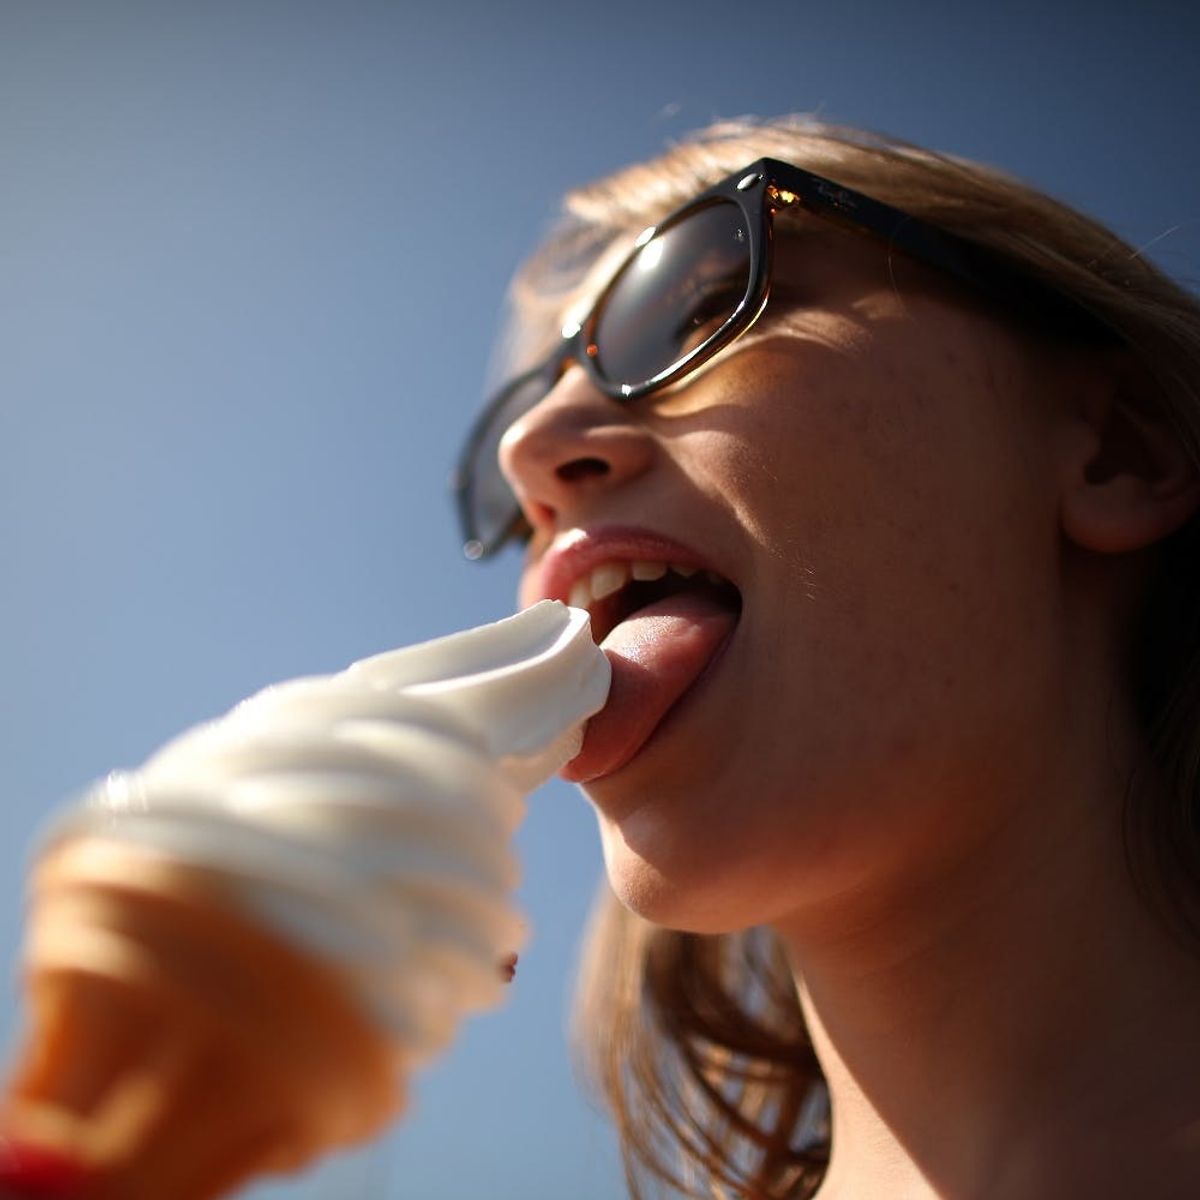 Dairy Queen Is Handing Out FREE Ice Cream and Here’s How You Can Score a Cone